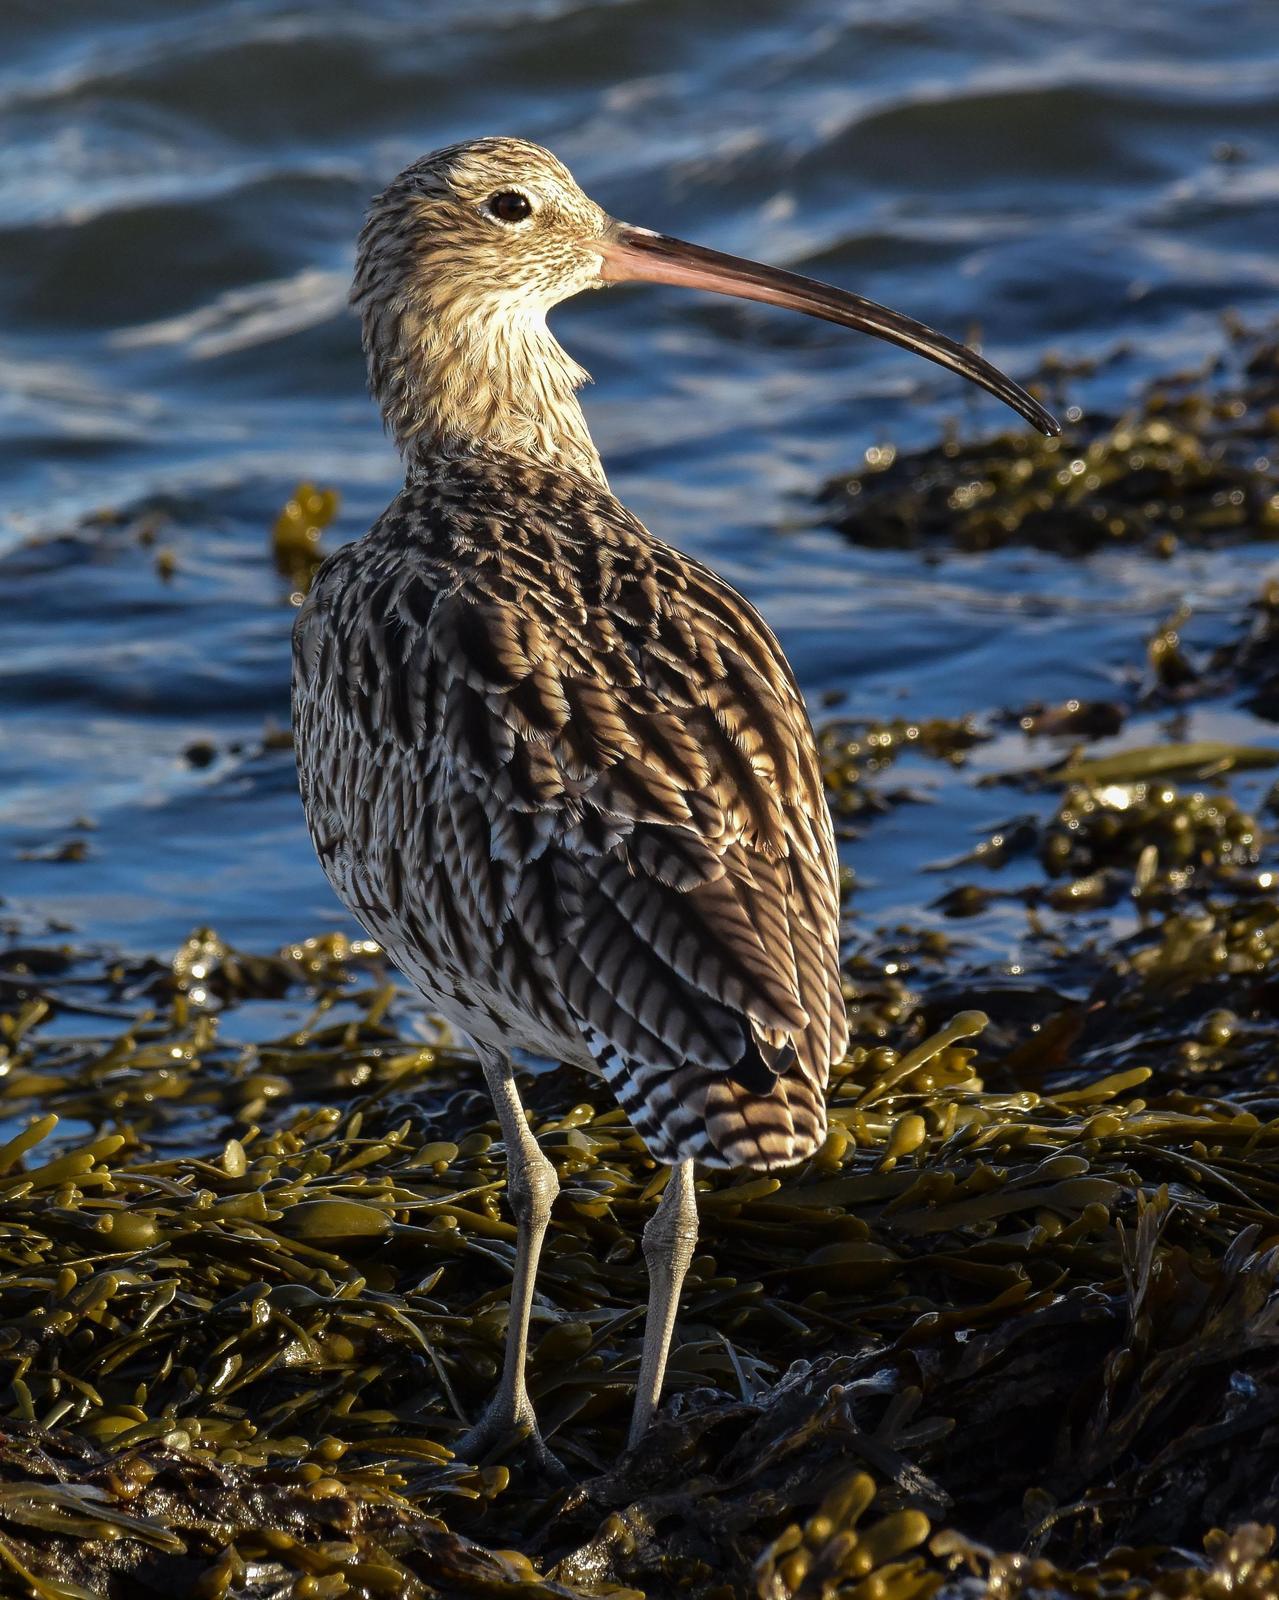 Eurasian Curlew Photo by Emily Percival